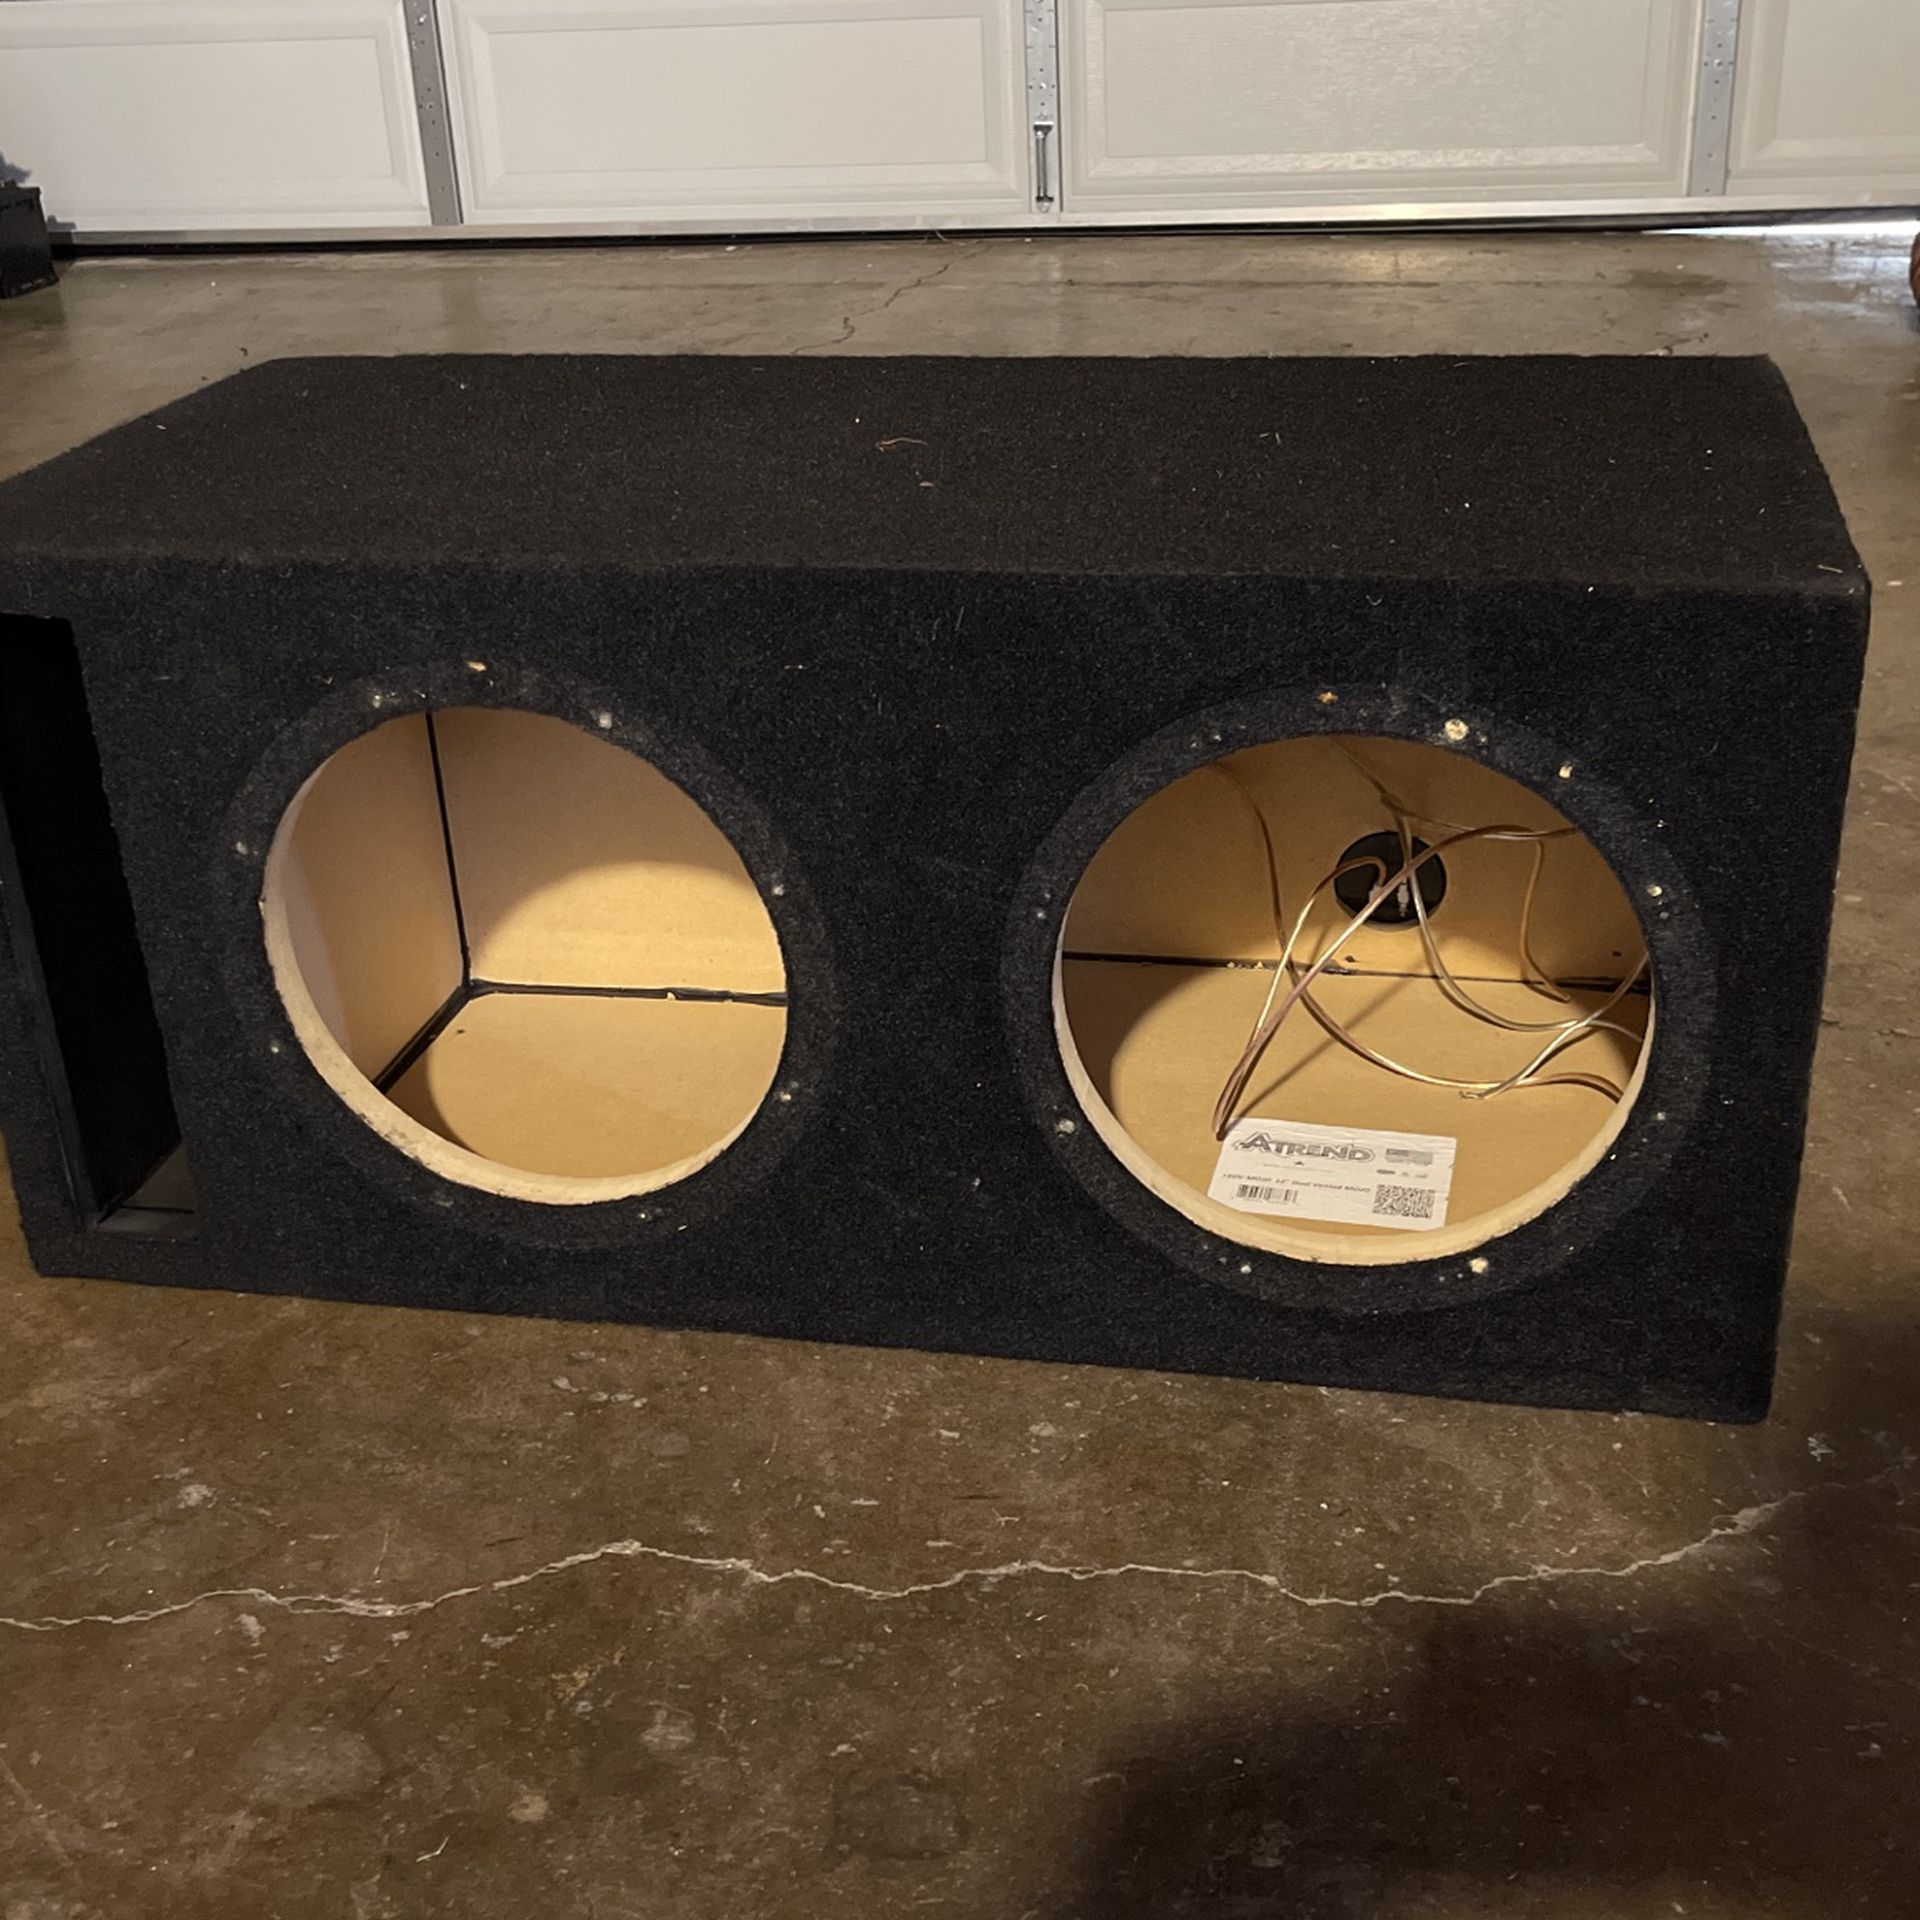 12” Subwoofer Box Dual Vented